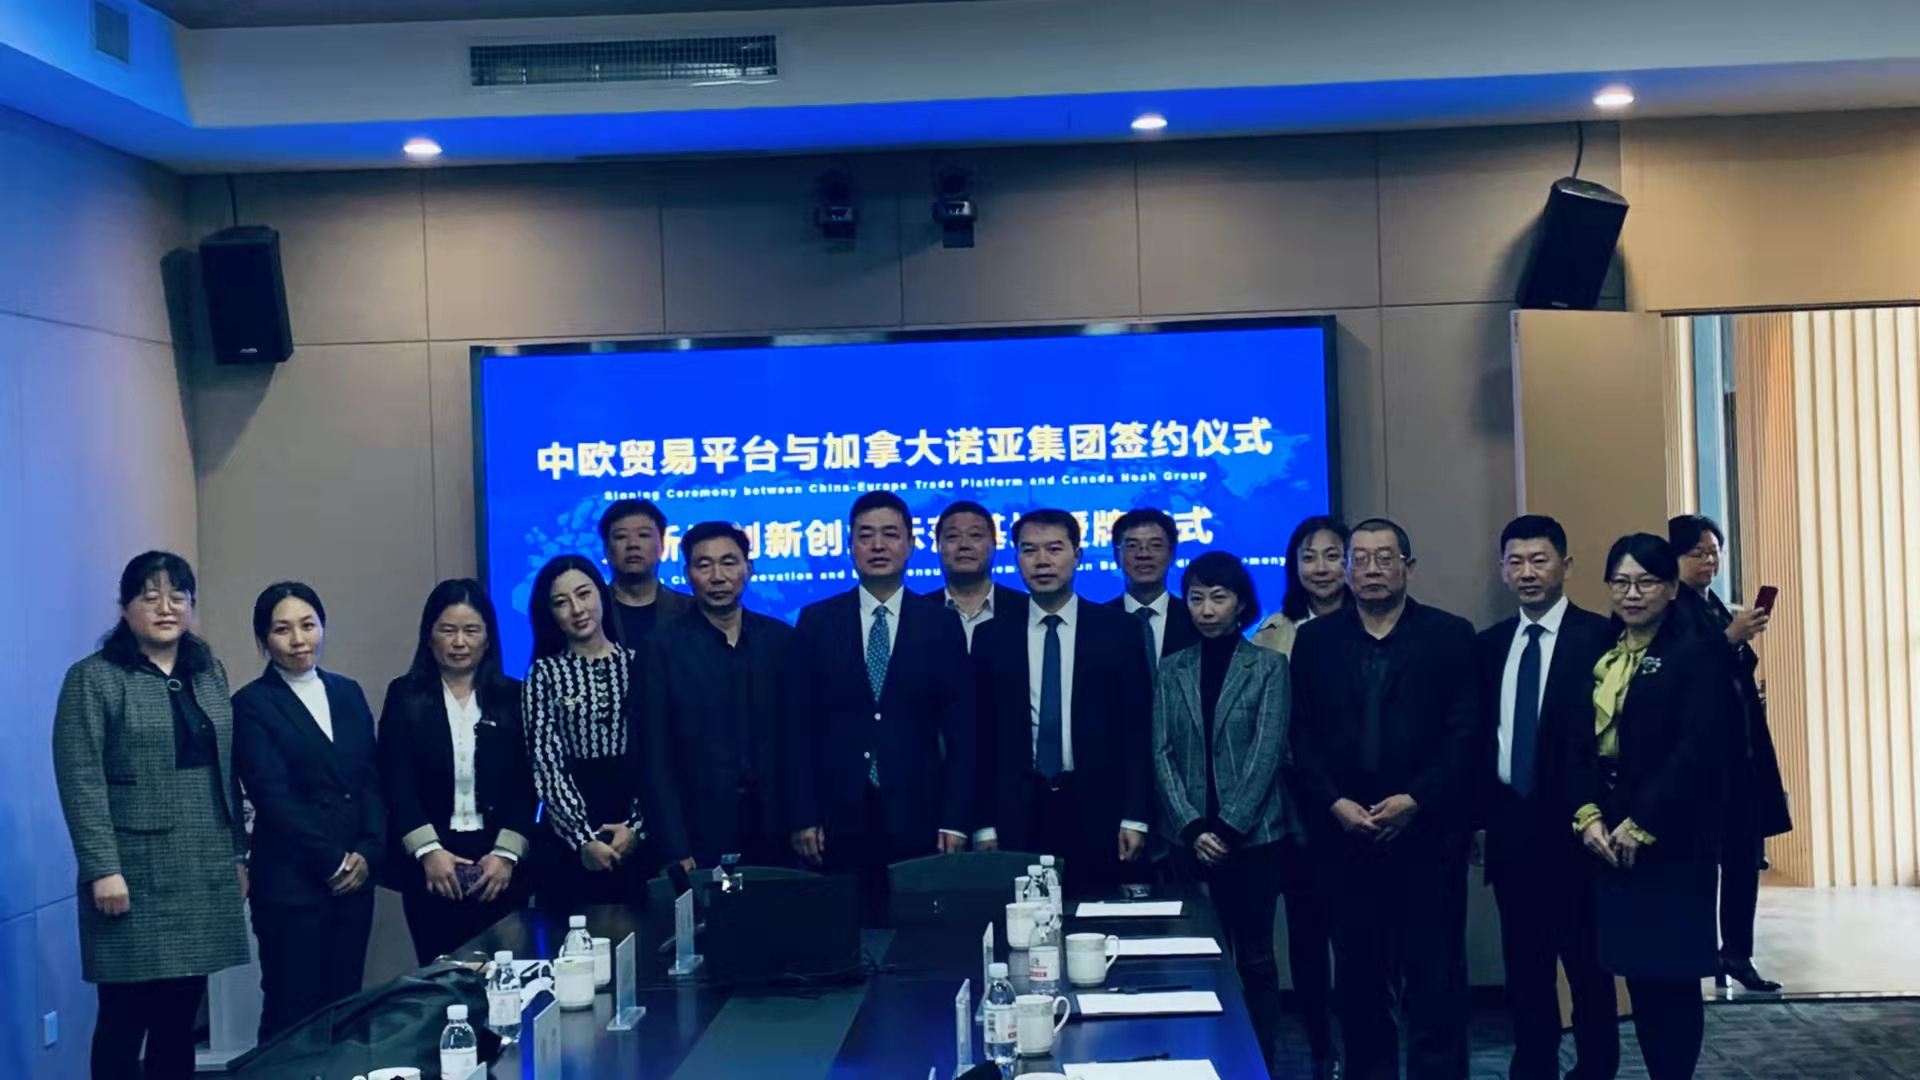 The joint venture signing ceremony between Canada's Noah Digital Group and China-EU Trade Platform in Qingdao